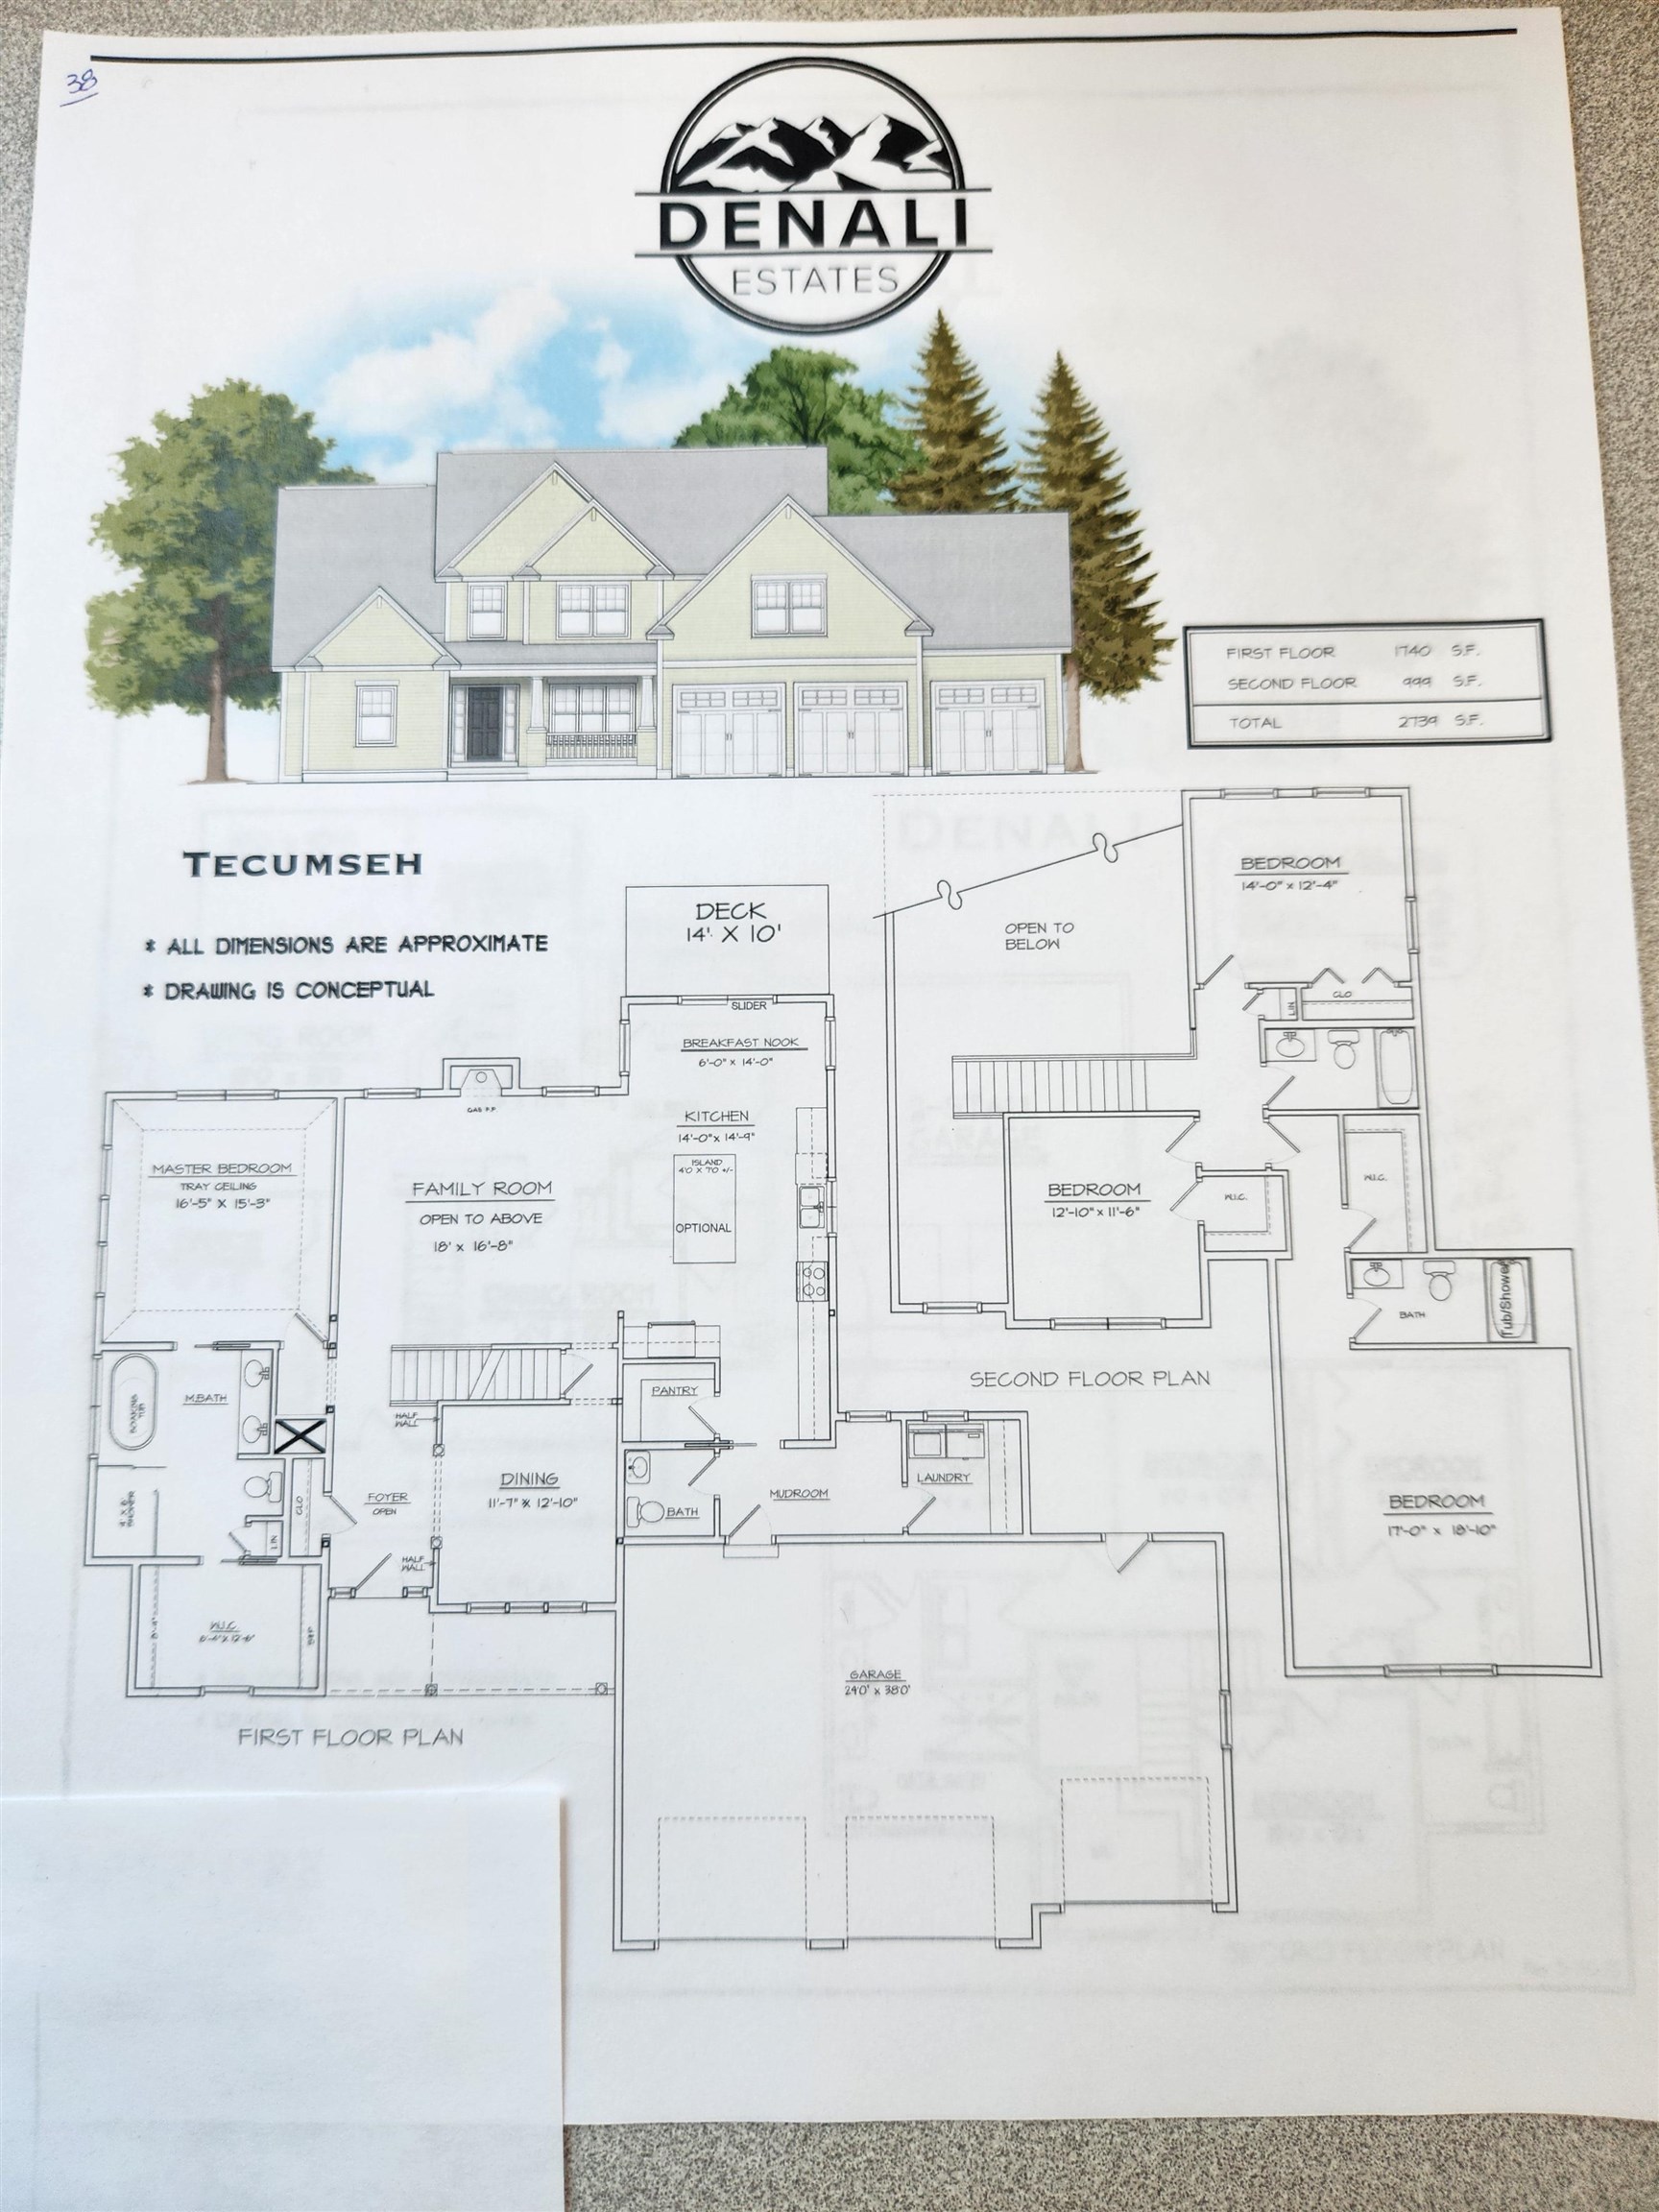 *** To be built*** Brand New Model and floor plan. The "Tecumseh" has a first floor Primary Bedroom suite, 3 and 1/2 baths, 3 car garage. This home can be yours before the year ends. Pick and choose your finishes too.